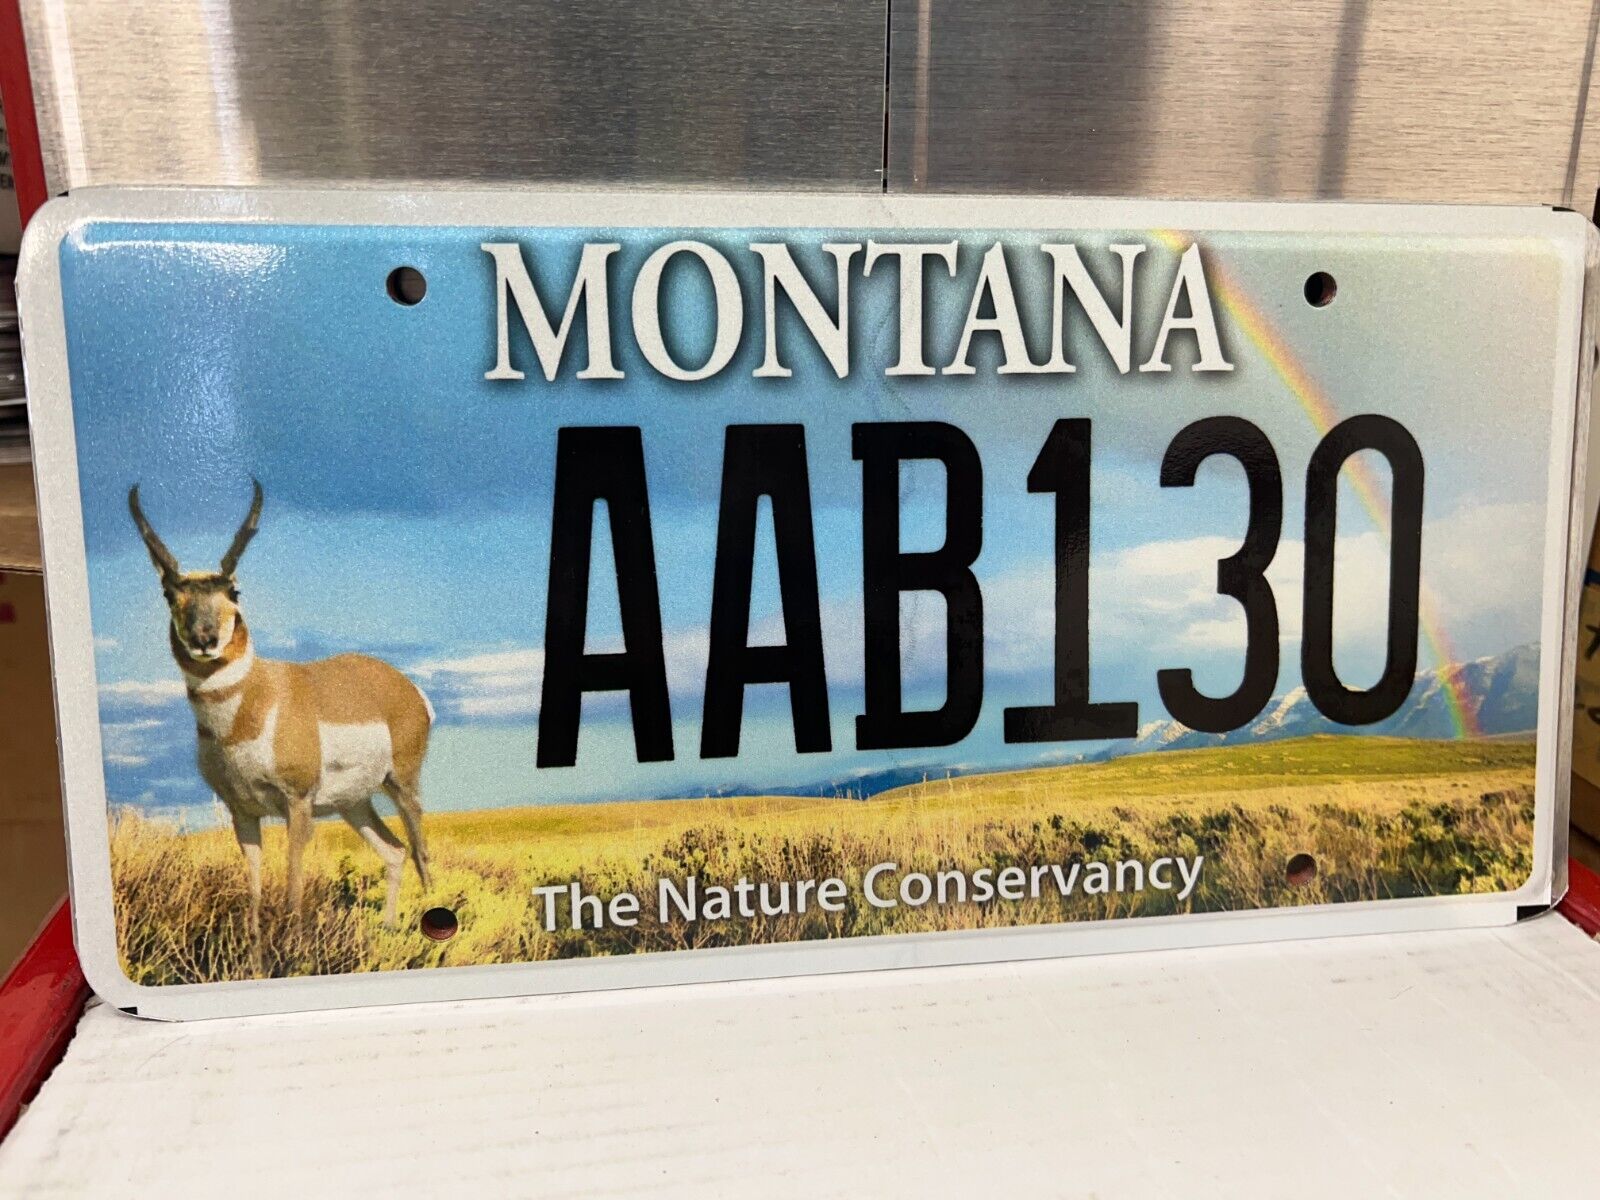 THE NATURE CONSERVANCY  MONTANA LICENSE PLATE